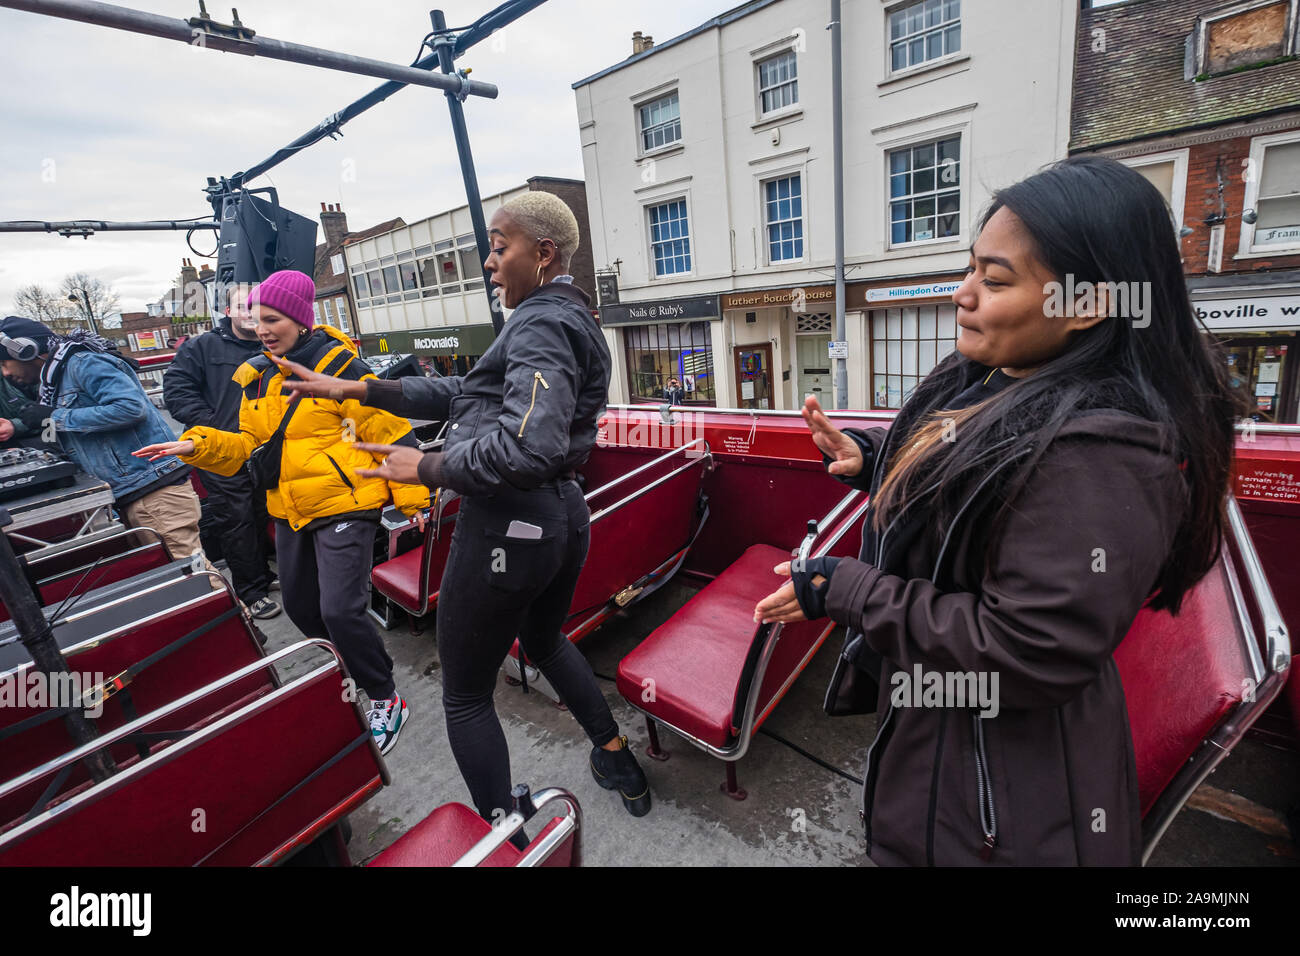 London, UK. 16th November 2019. People dance on top of the bus. Protesters from FCKBoris in orange knitted hats walk through Uxbridge shopping centre handing out fliers urging everyone to register and vote against Boris Johnson and kick him out for his racist, elitist politics. They marched with a sound system on a bus to Brunel University to persuade students. Johnson had a majority of just over 5 thousand in 2017 and Labour candidate Ali Milani has strong hopes of beating him and the other 10 candidates. Peter Marshall/Alamy Live News Stock Photo